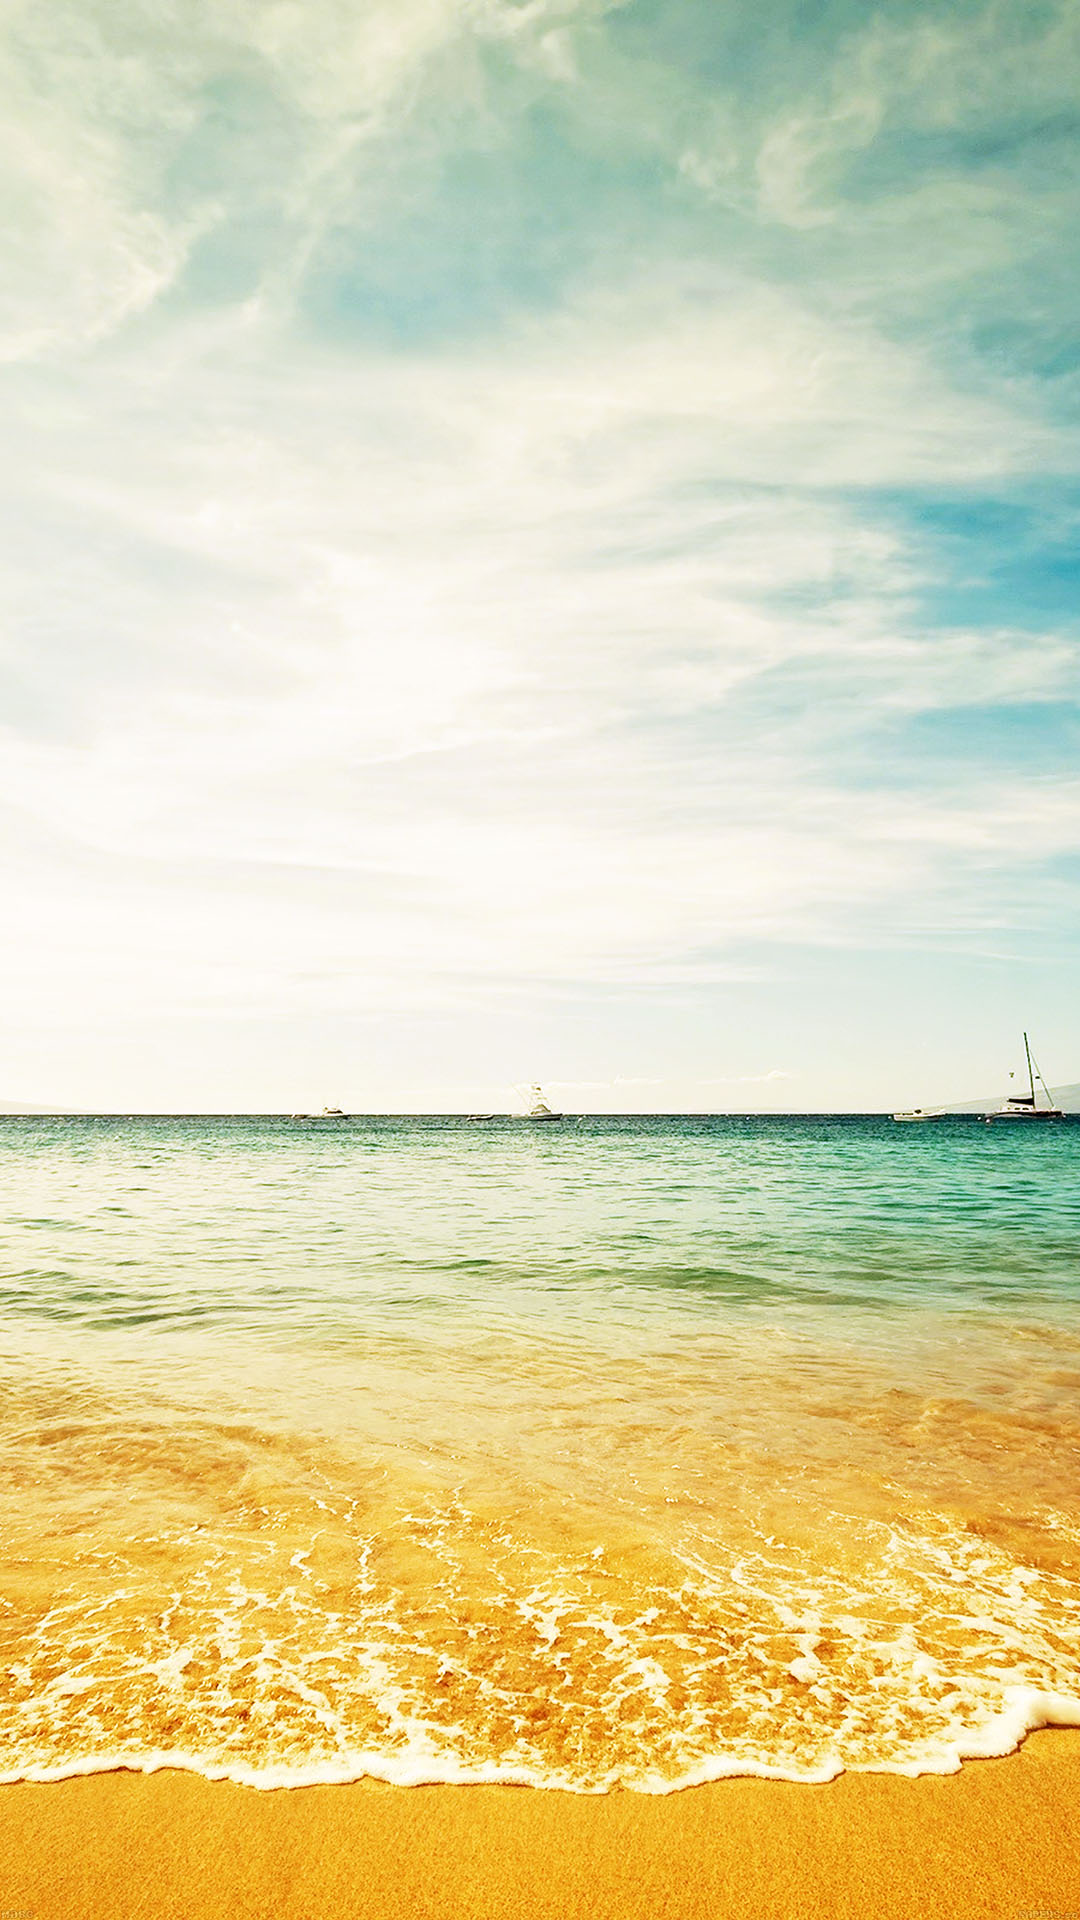 Ocean Sea Yellow Beaches Boat Nature Android wallpaper